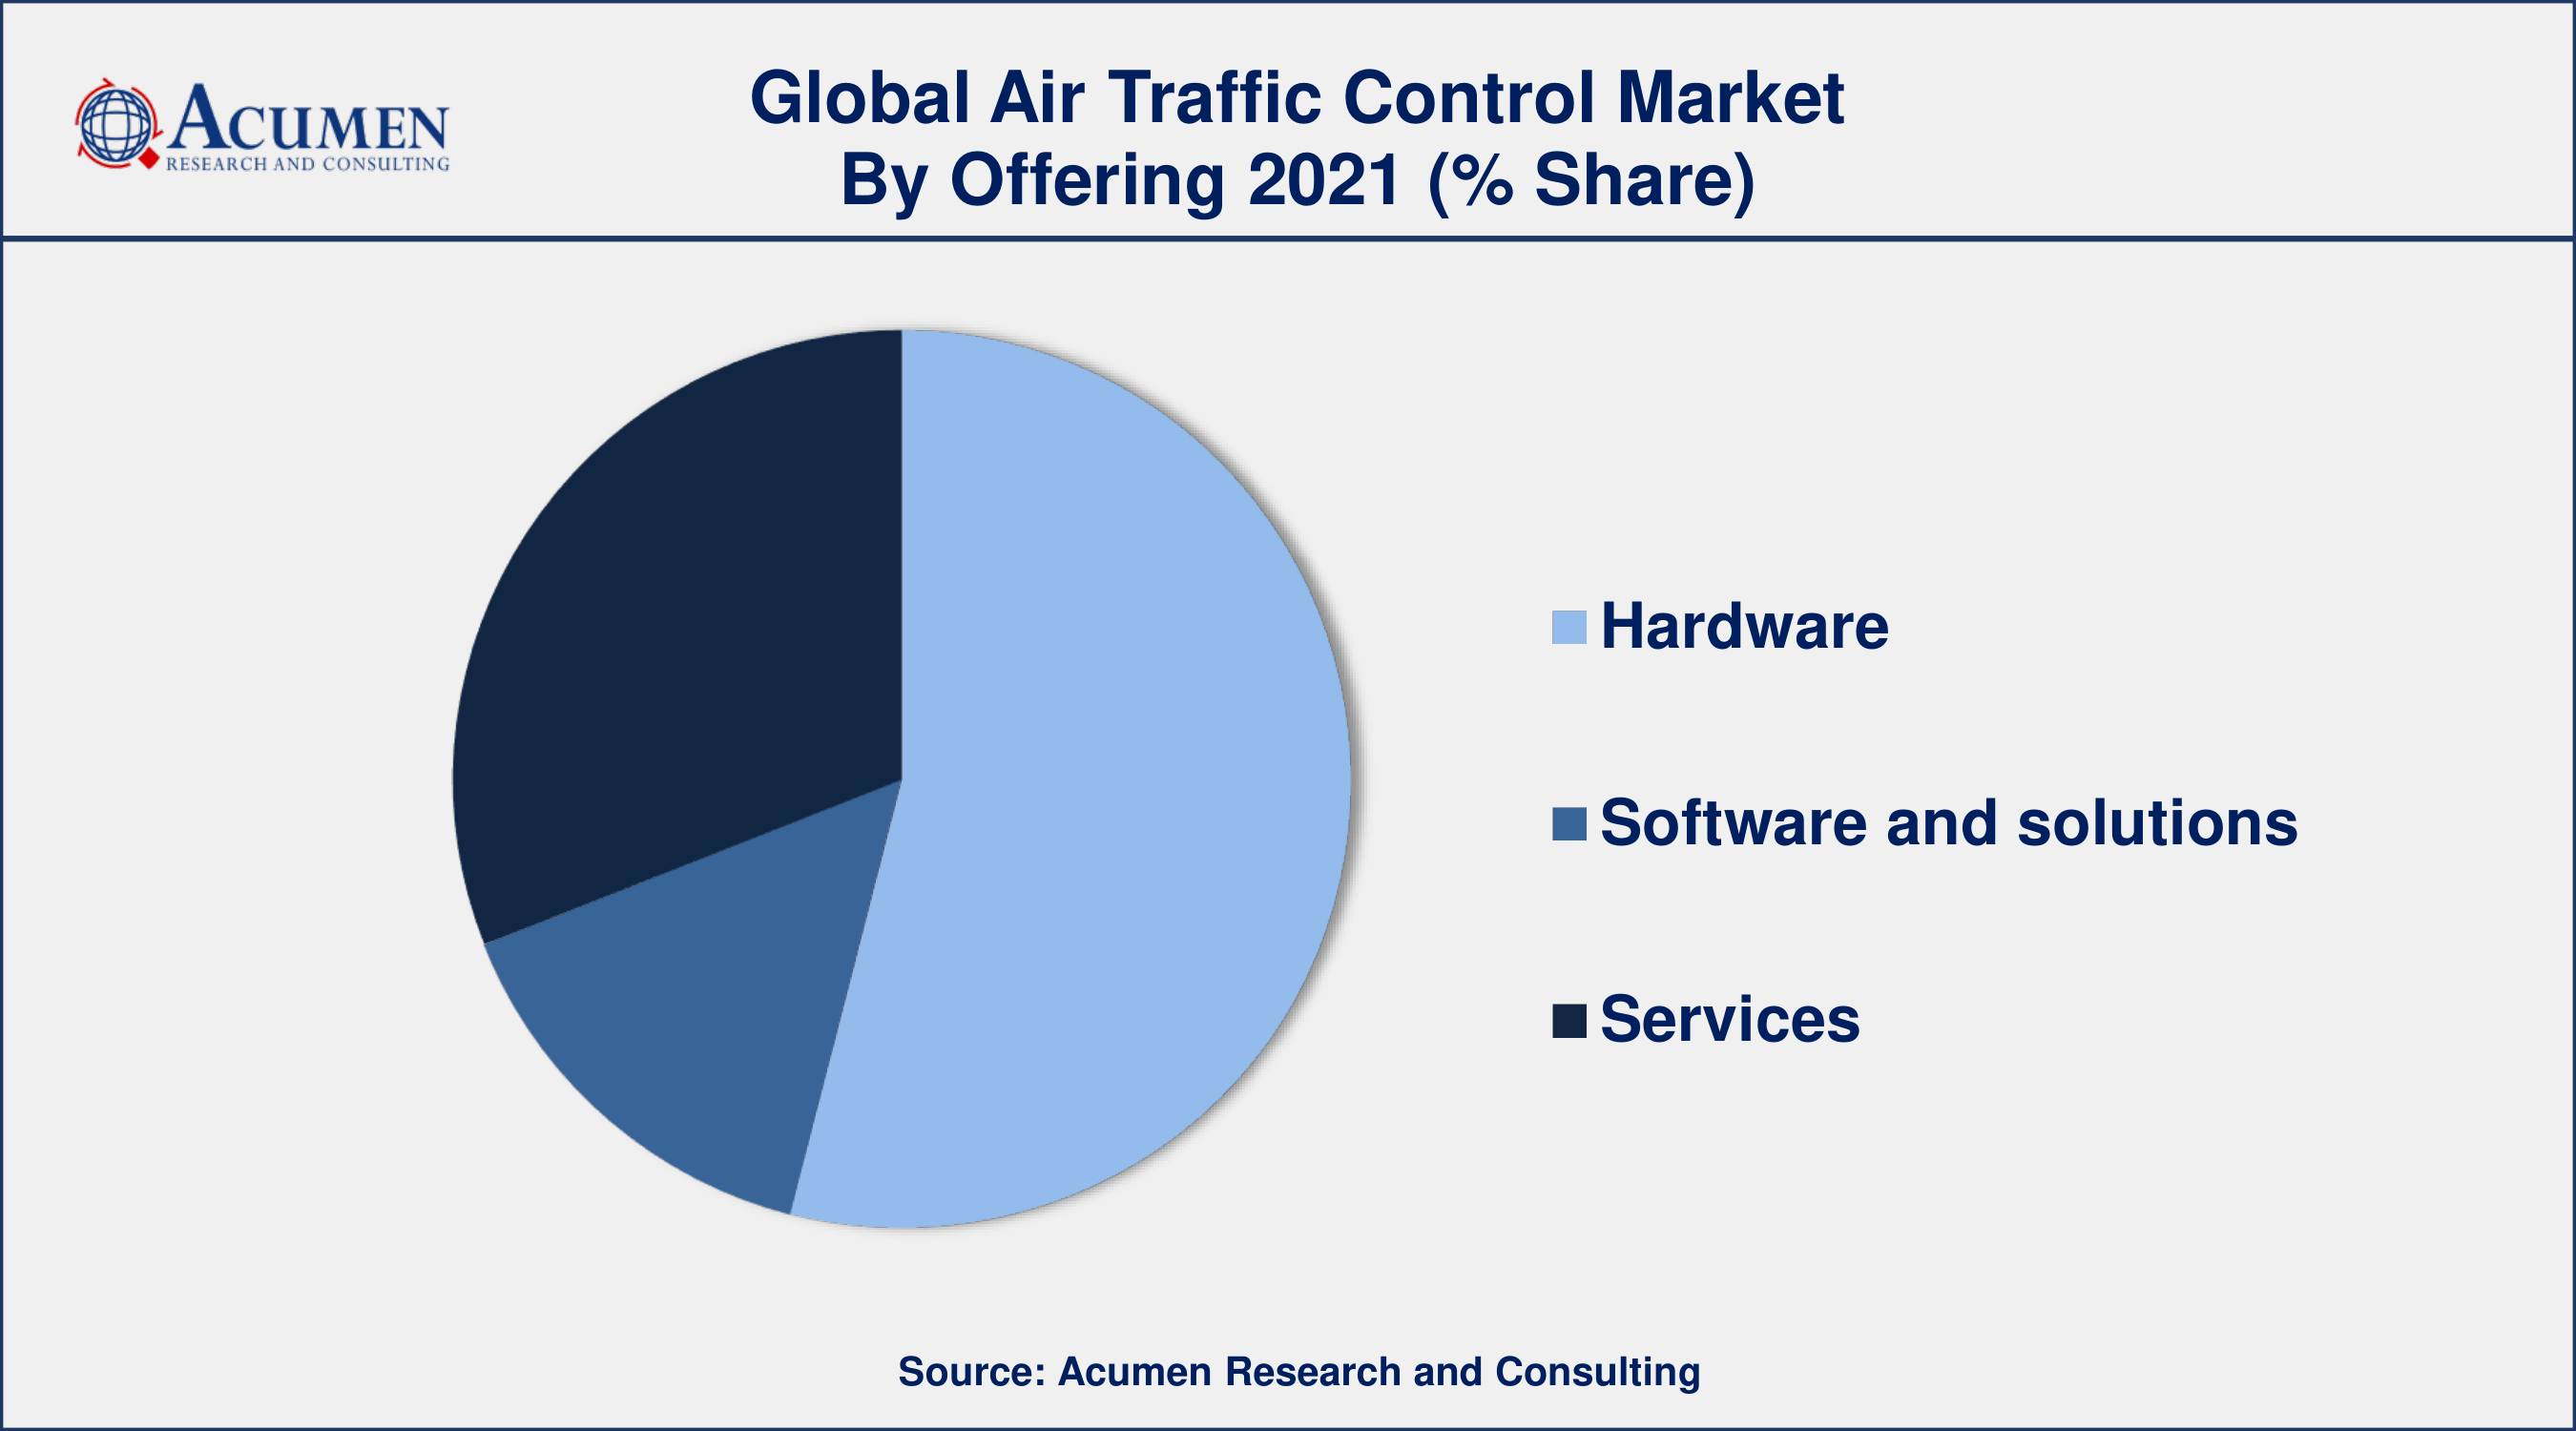 Among offering, software and solutions category engaged more than 54% of the total market share